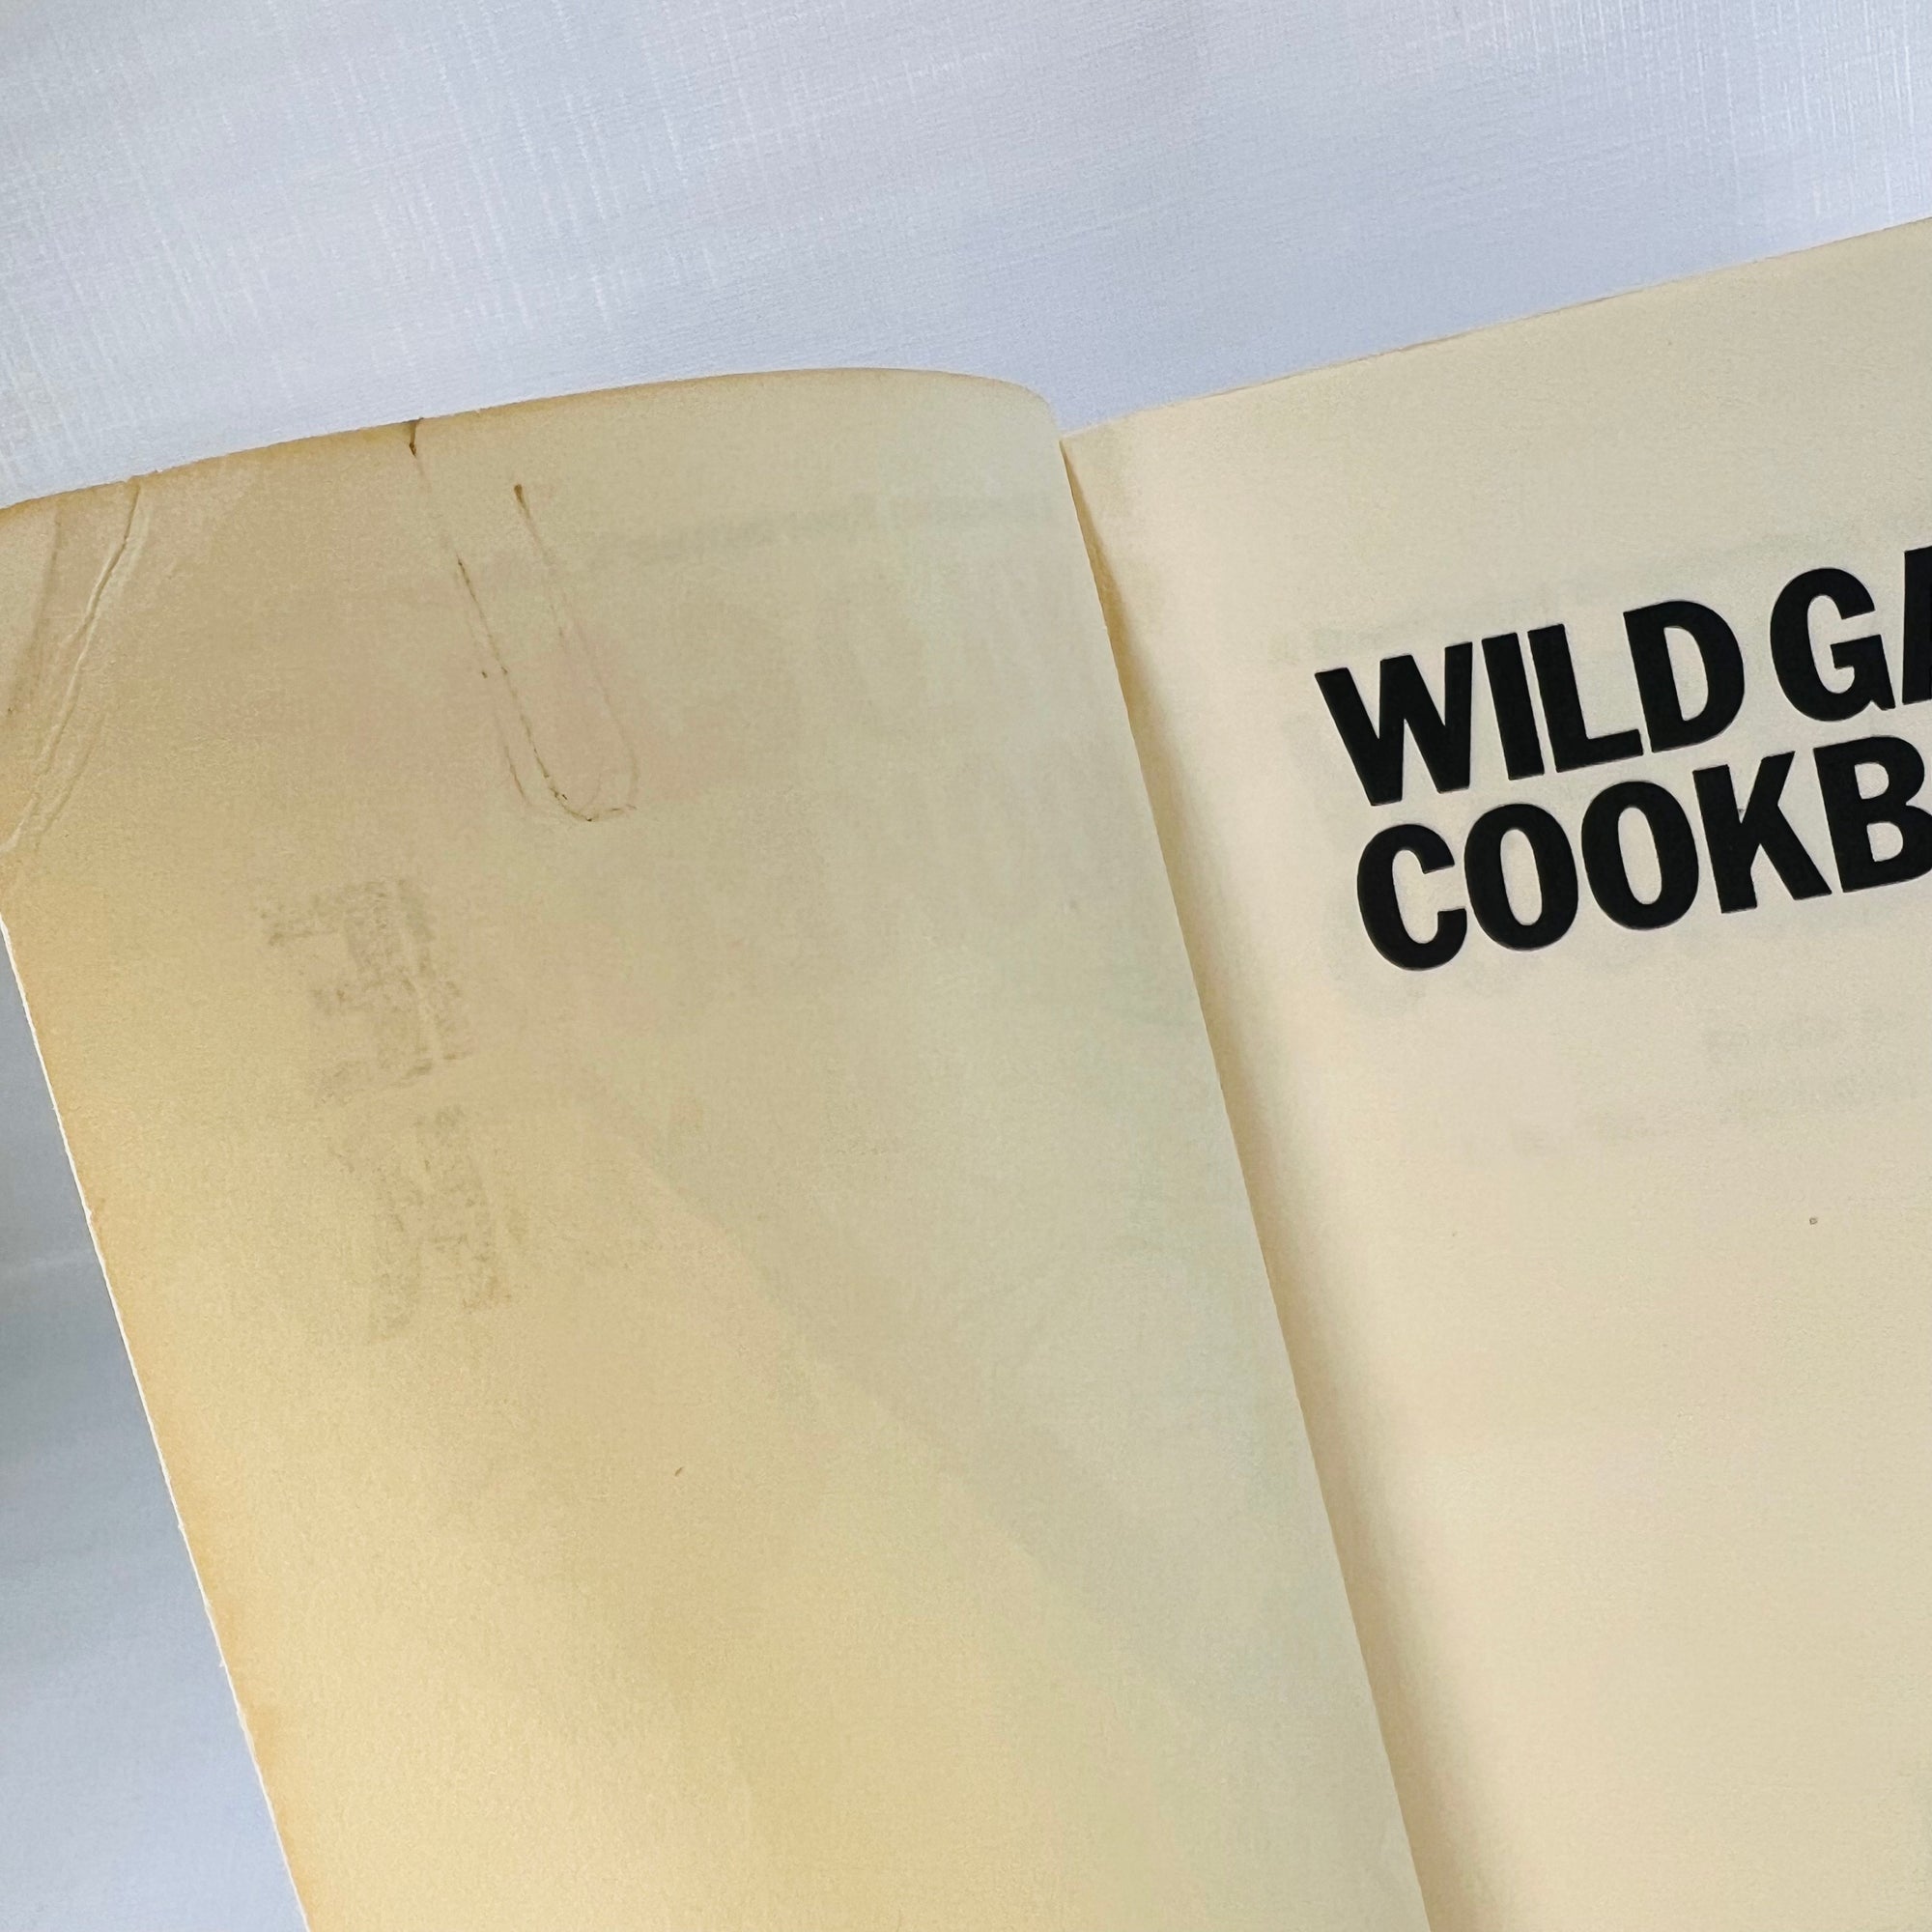 Wild Game Cook Book  edited by L.W. Johnson 1970 A Remington Sportsman Library Book